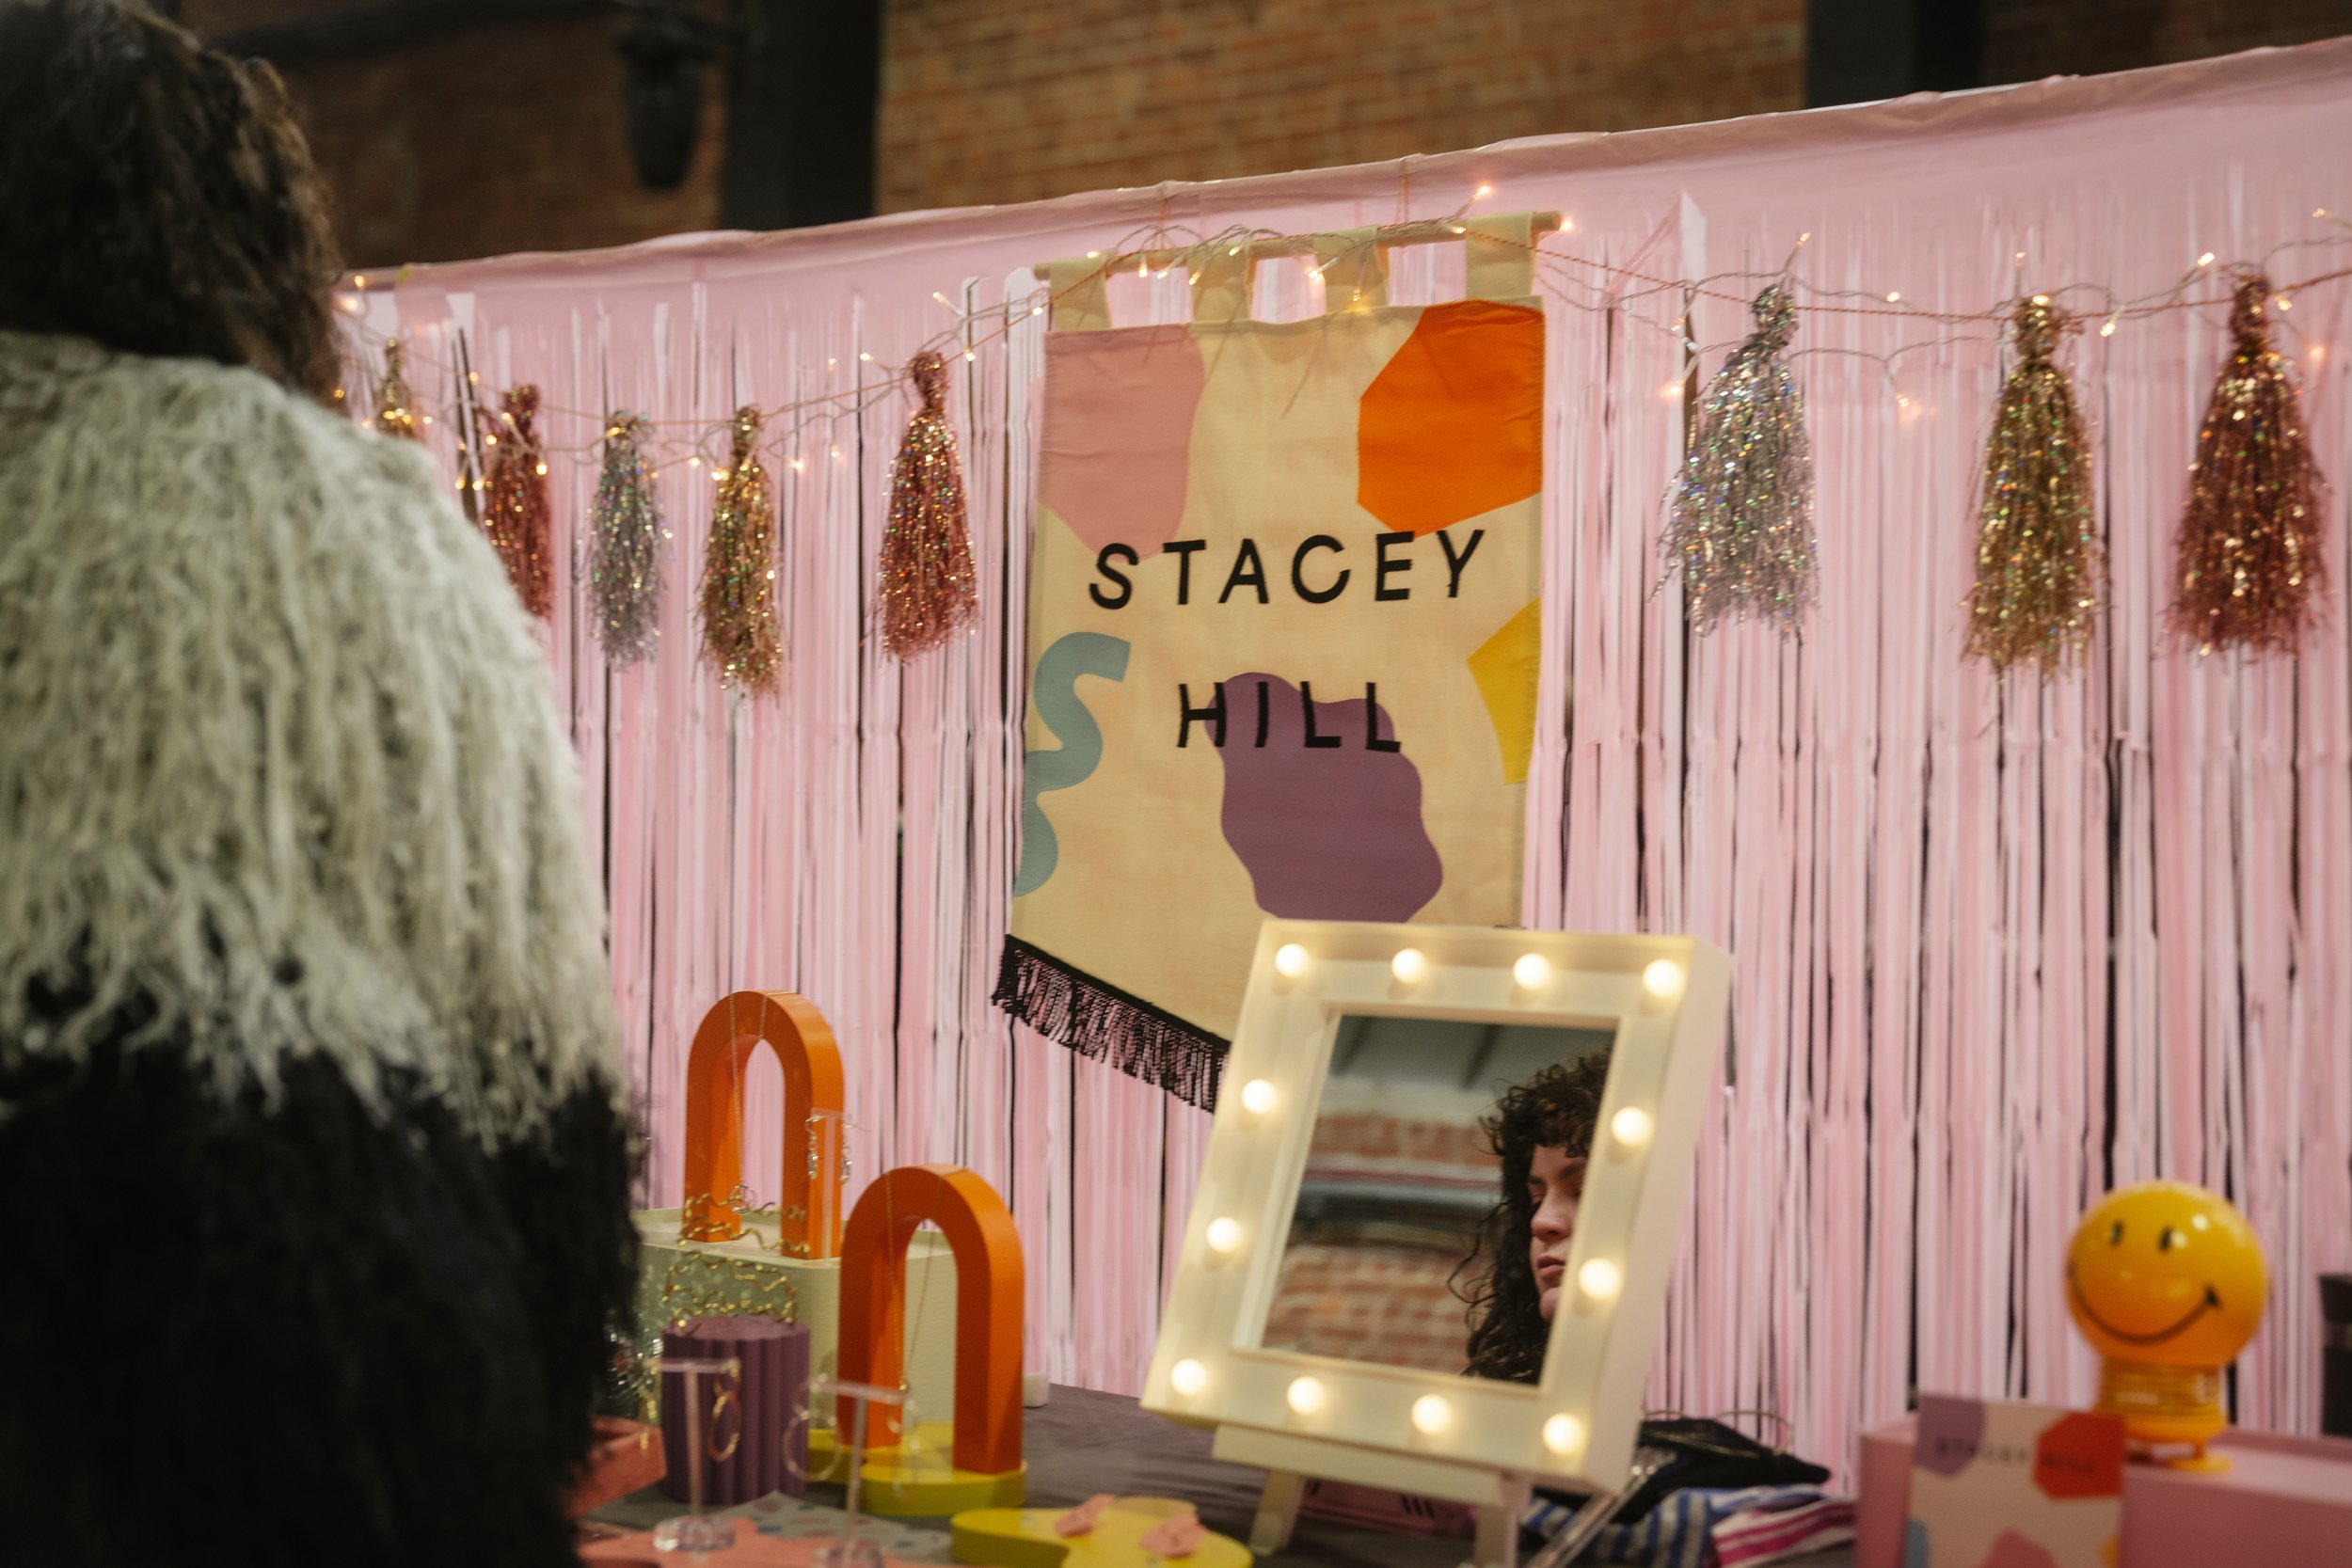  STACEY HILL banner against streamers which are hung behind awesome wedding jewellery showcased at various heights. 